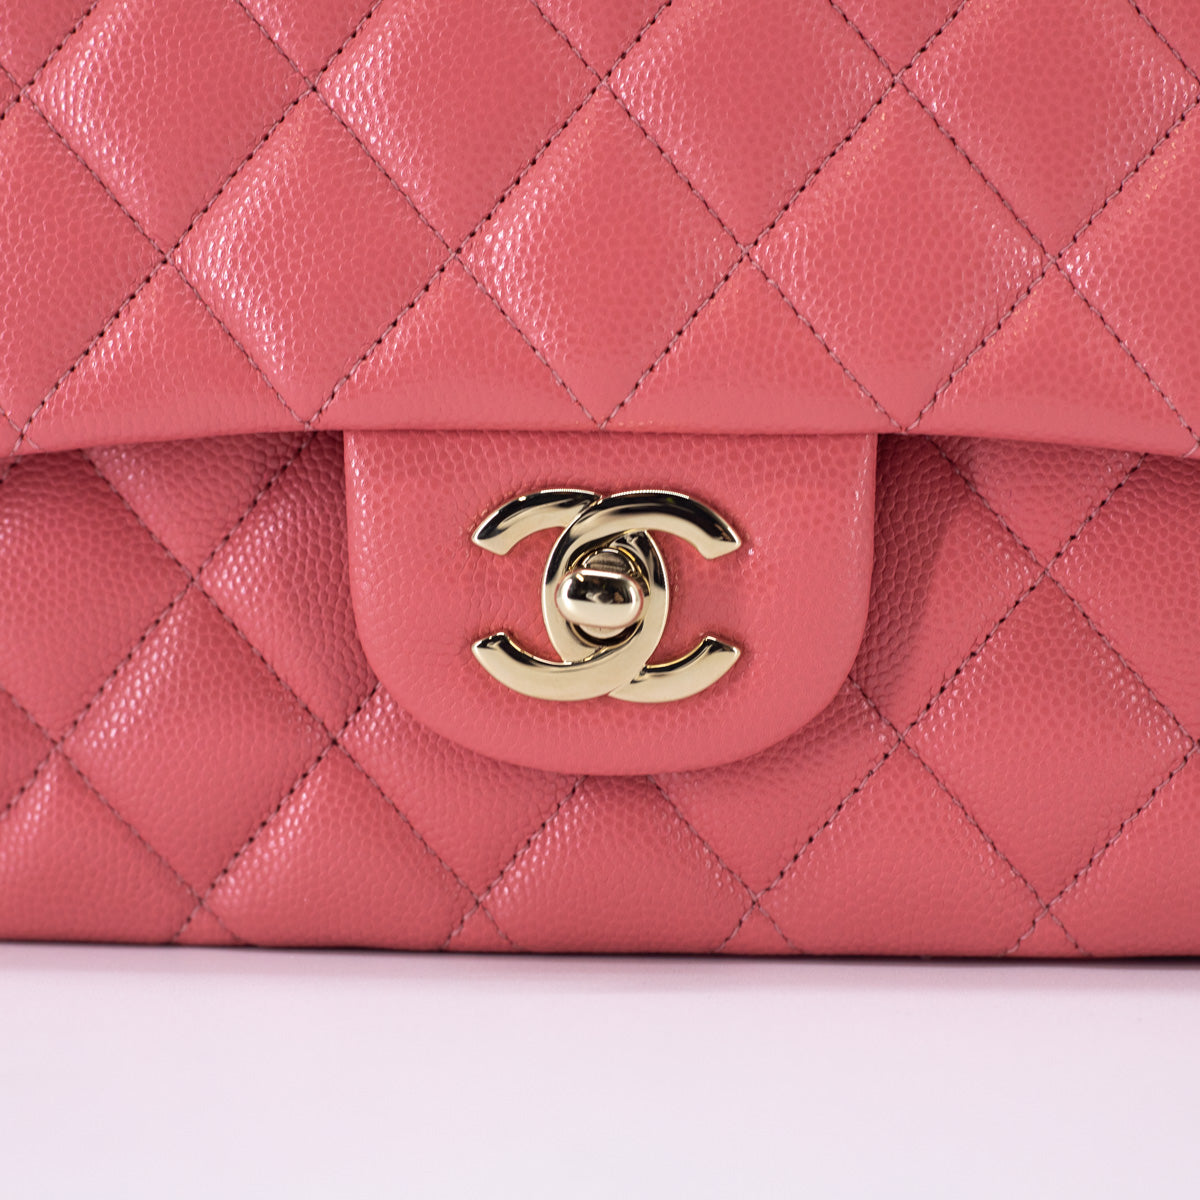 Pink Quilted Caviar Medium Classic Double Flap Bag Silver Hardware  20032004  Handbags  Accessories  The Chanel Collection  2022   Sothebys